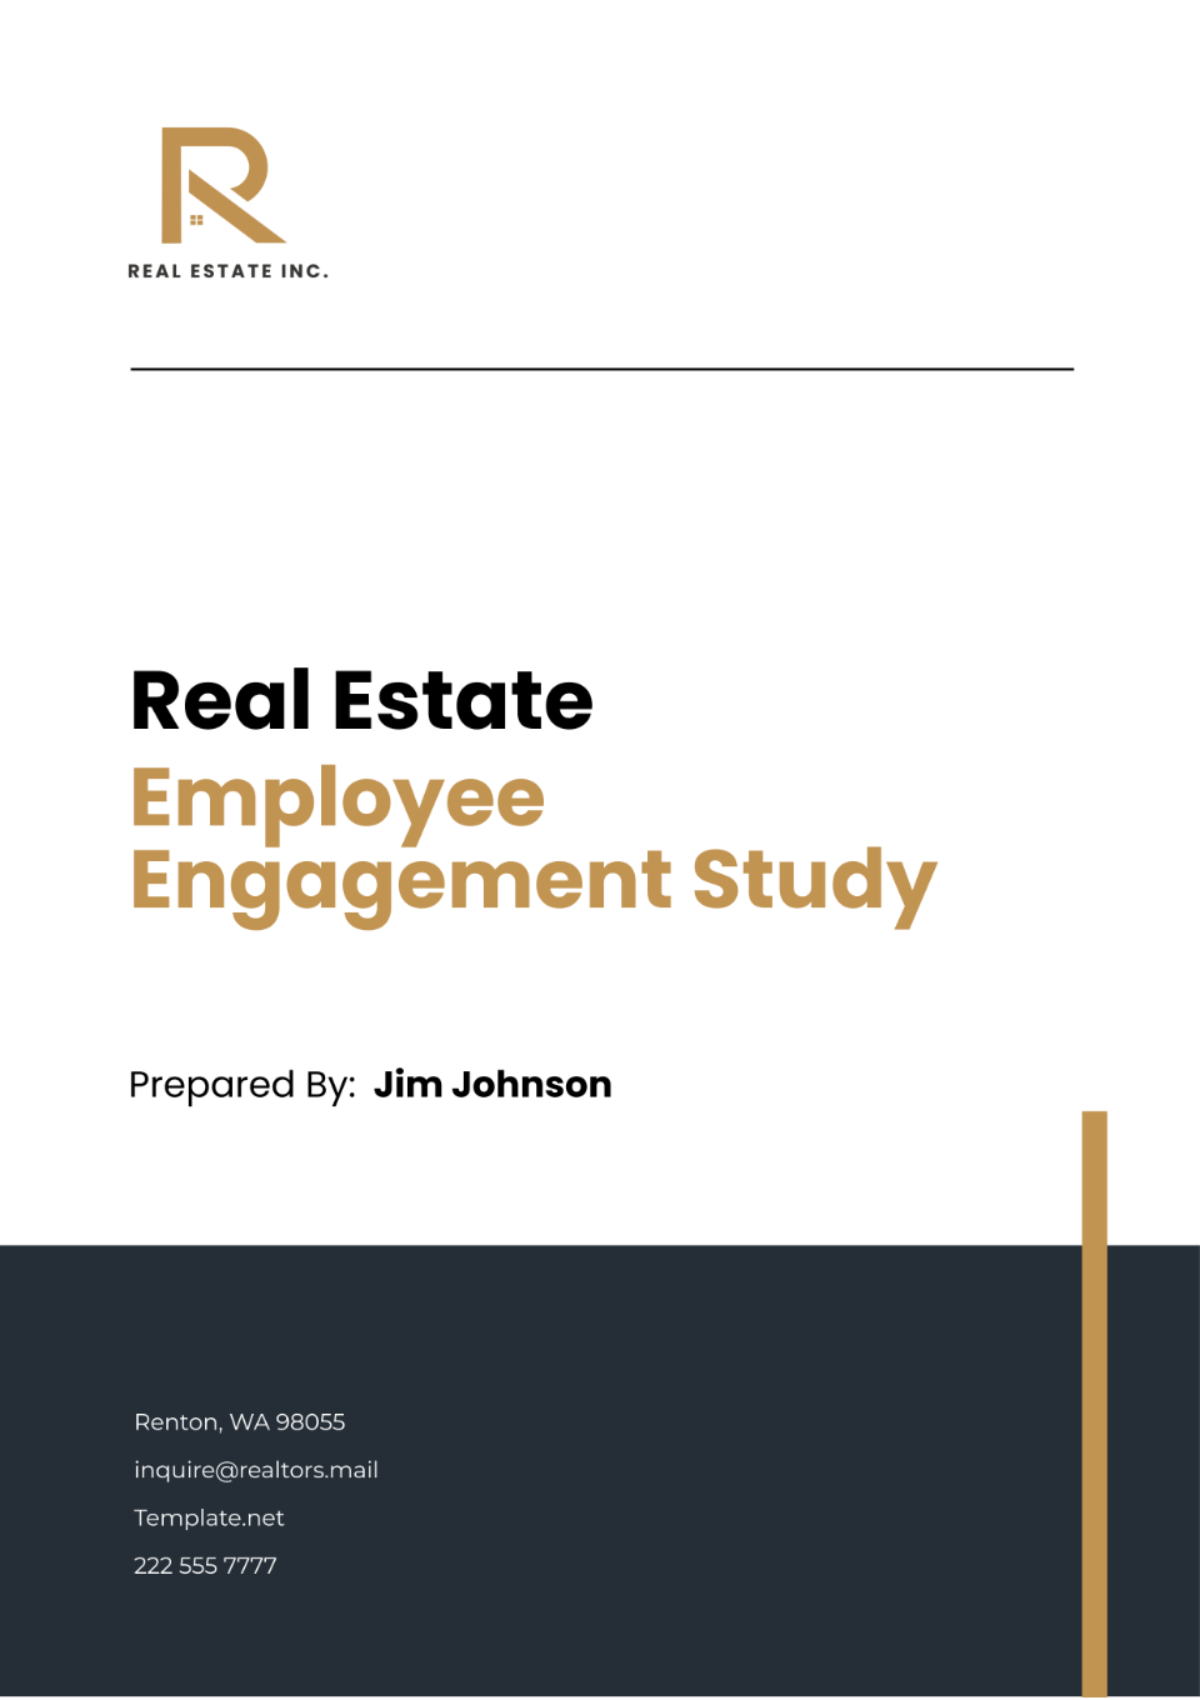 Free Real Estate Employee Engagement Study Template